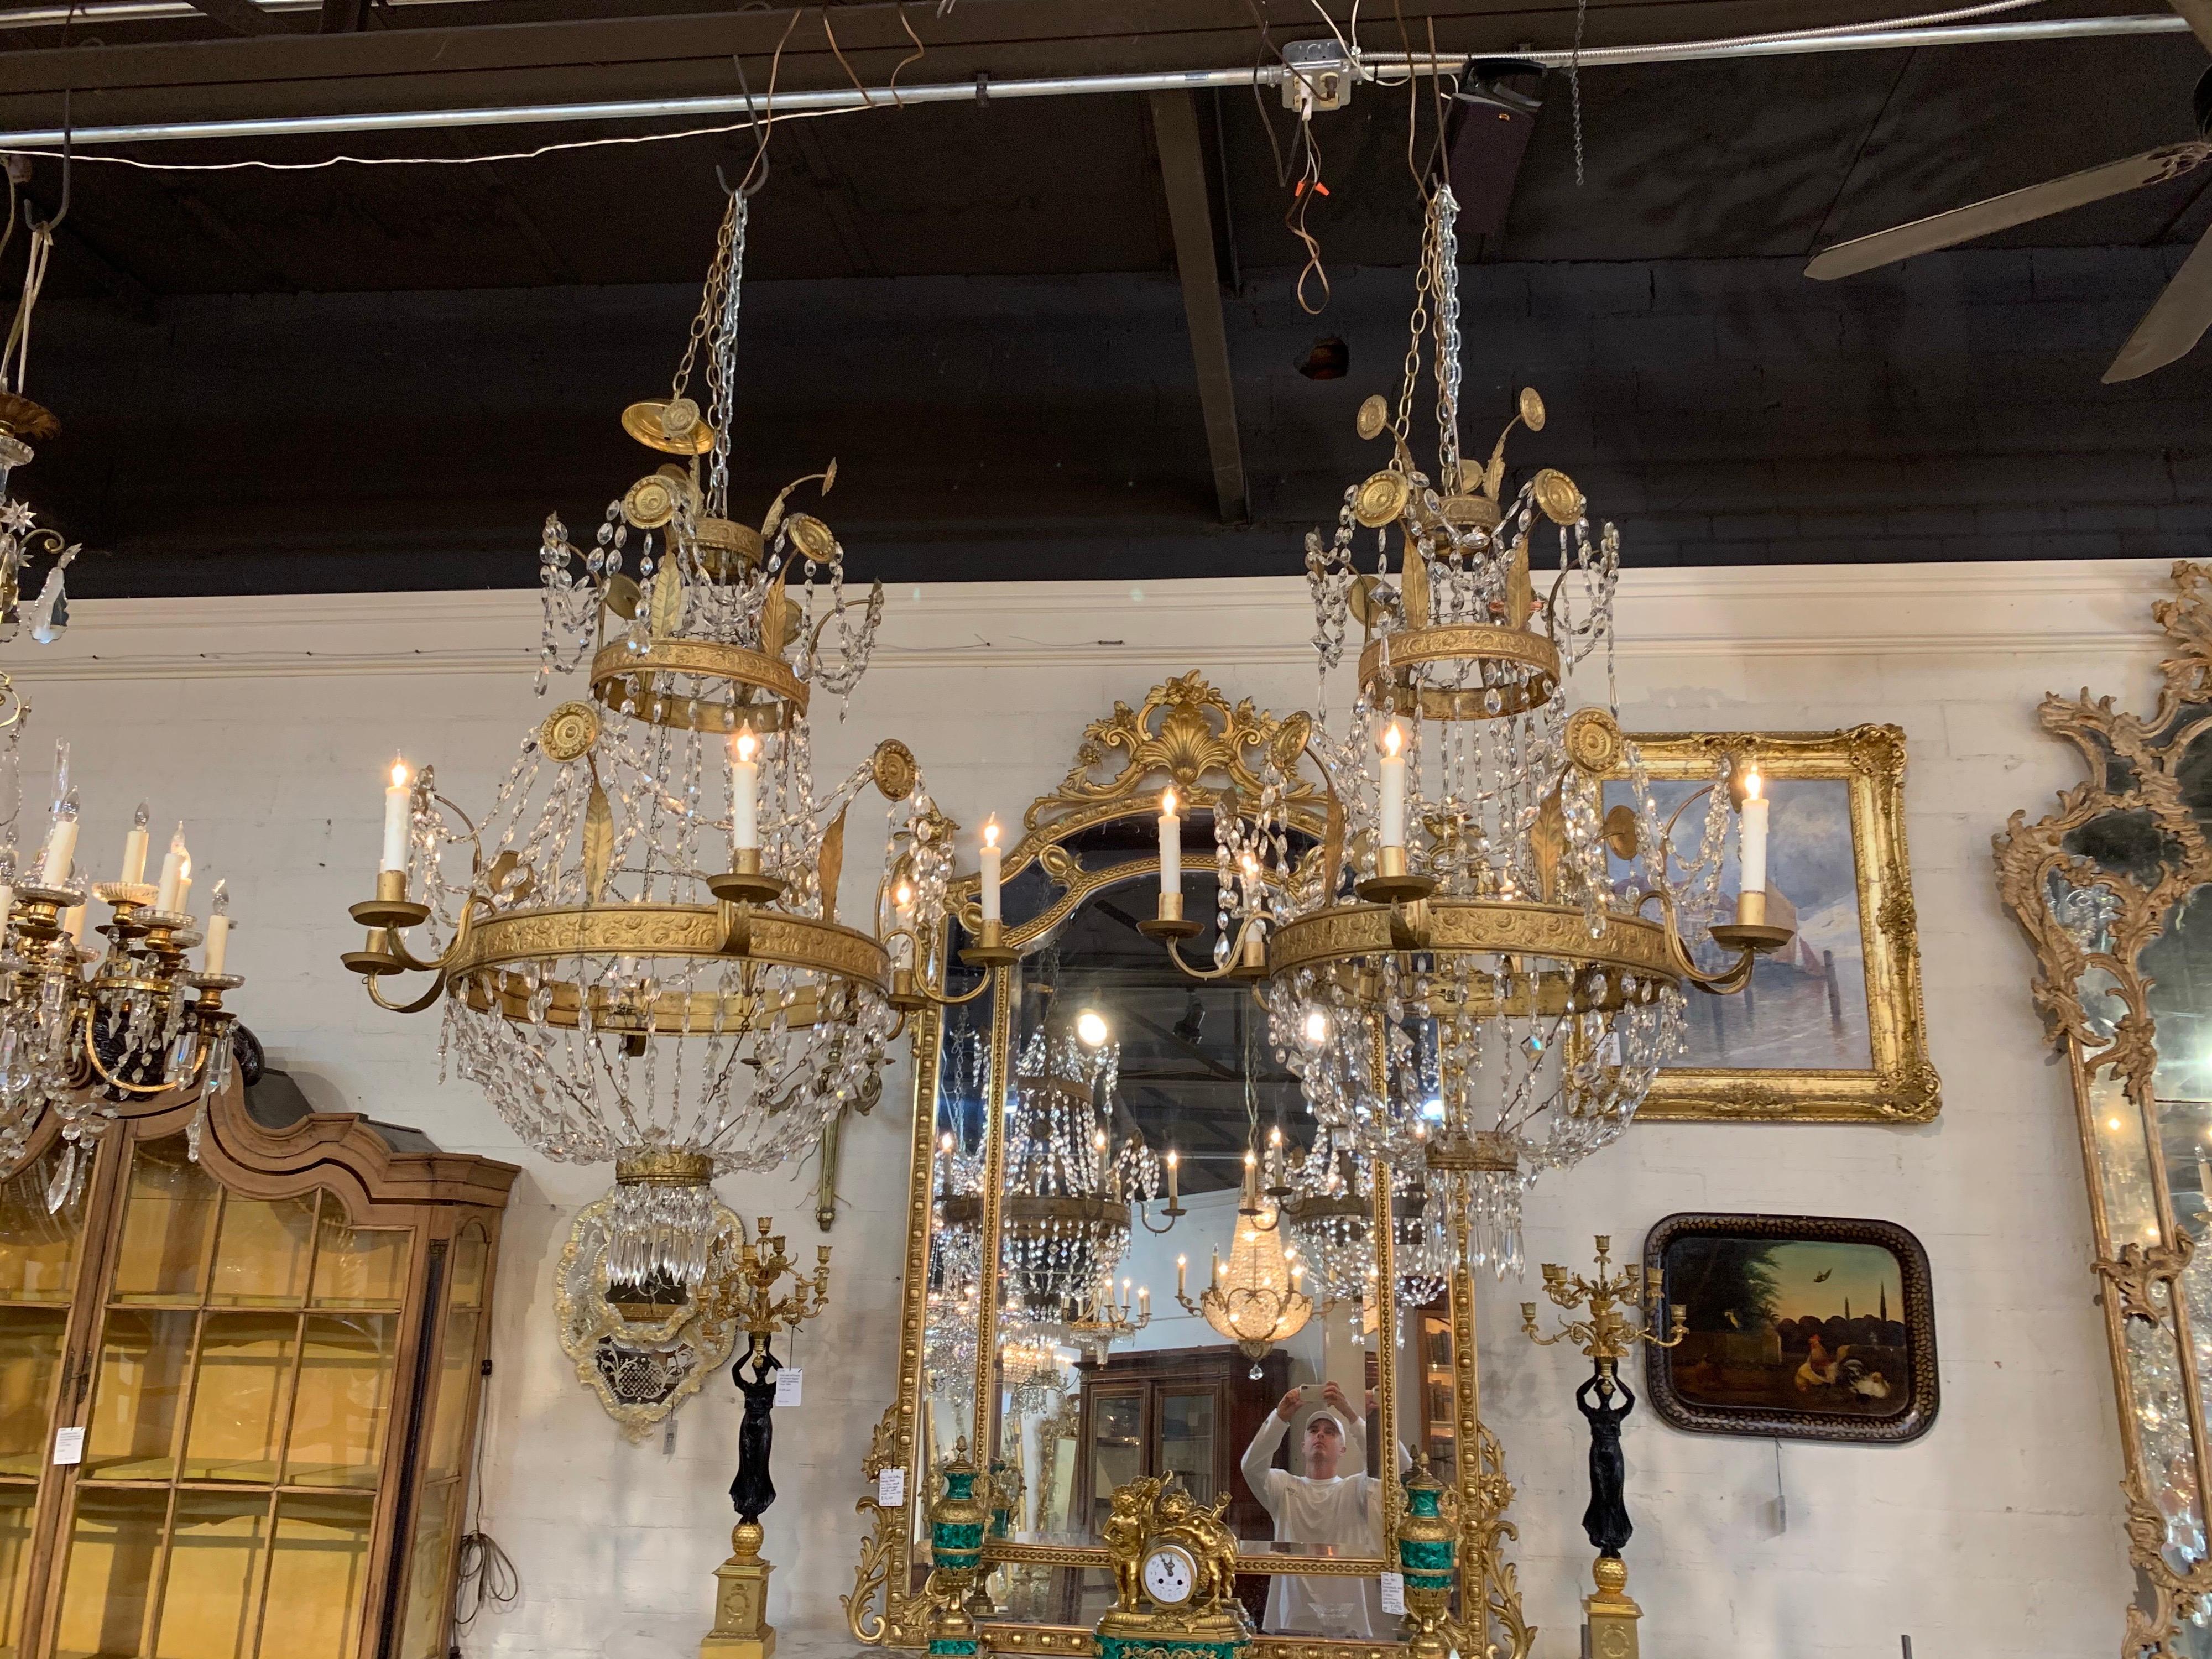 Exceptional pair of the 18th century Italian gilt metal beaded and crystal chandeliers from Tuscany. Featuring beautiful floral design on the gilt and shimmering crystals. Outstanding!